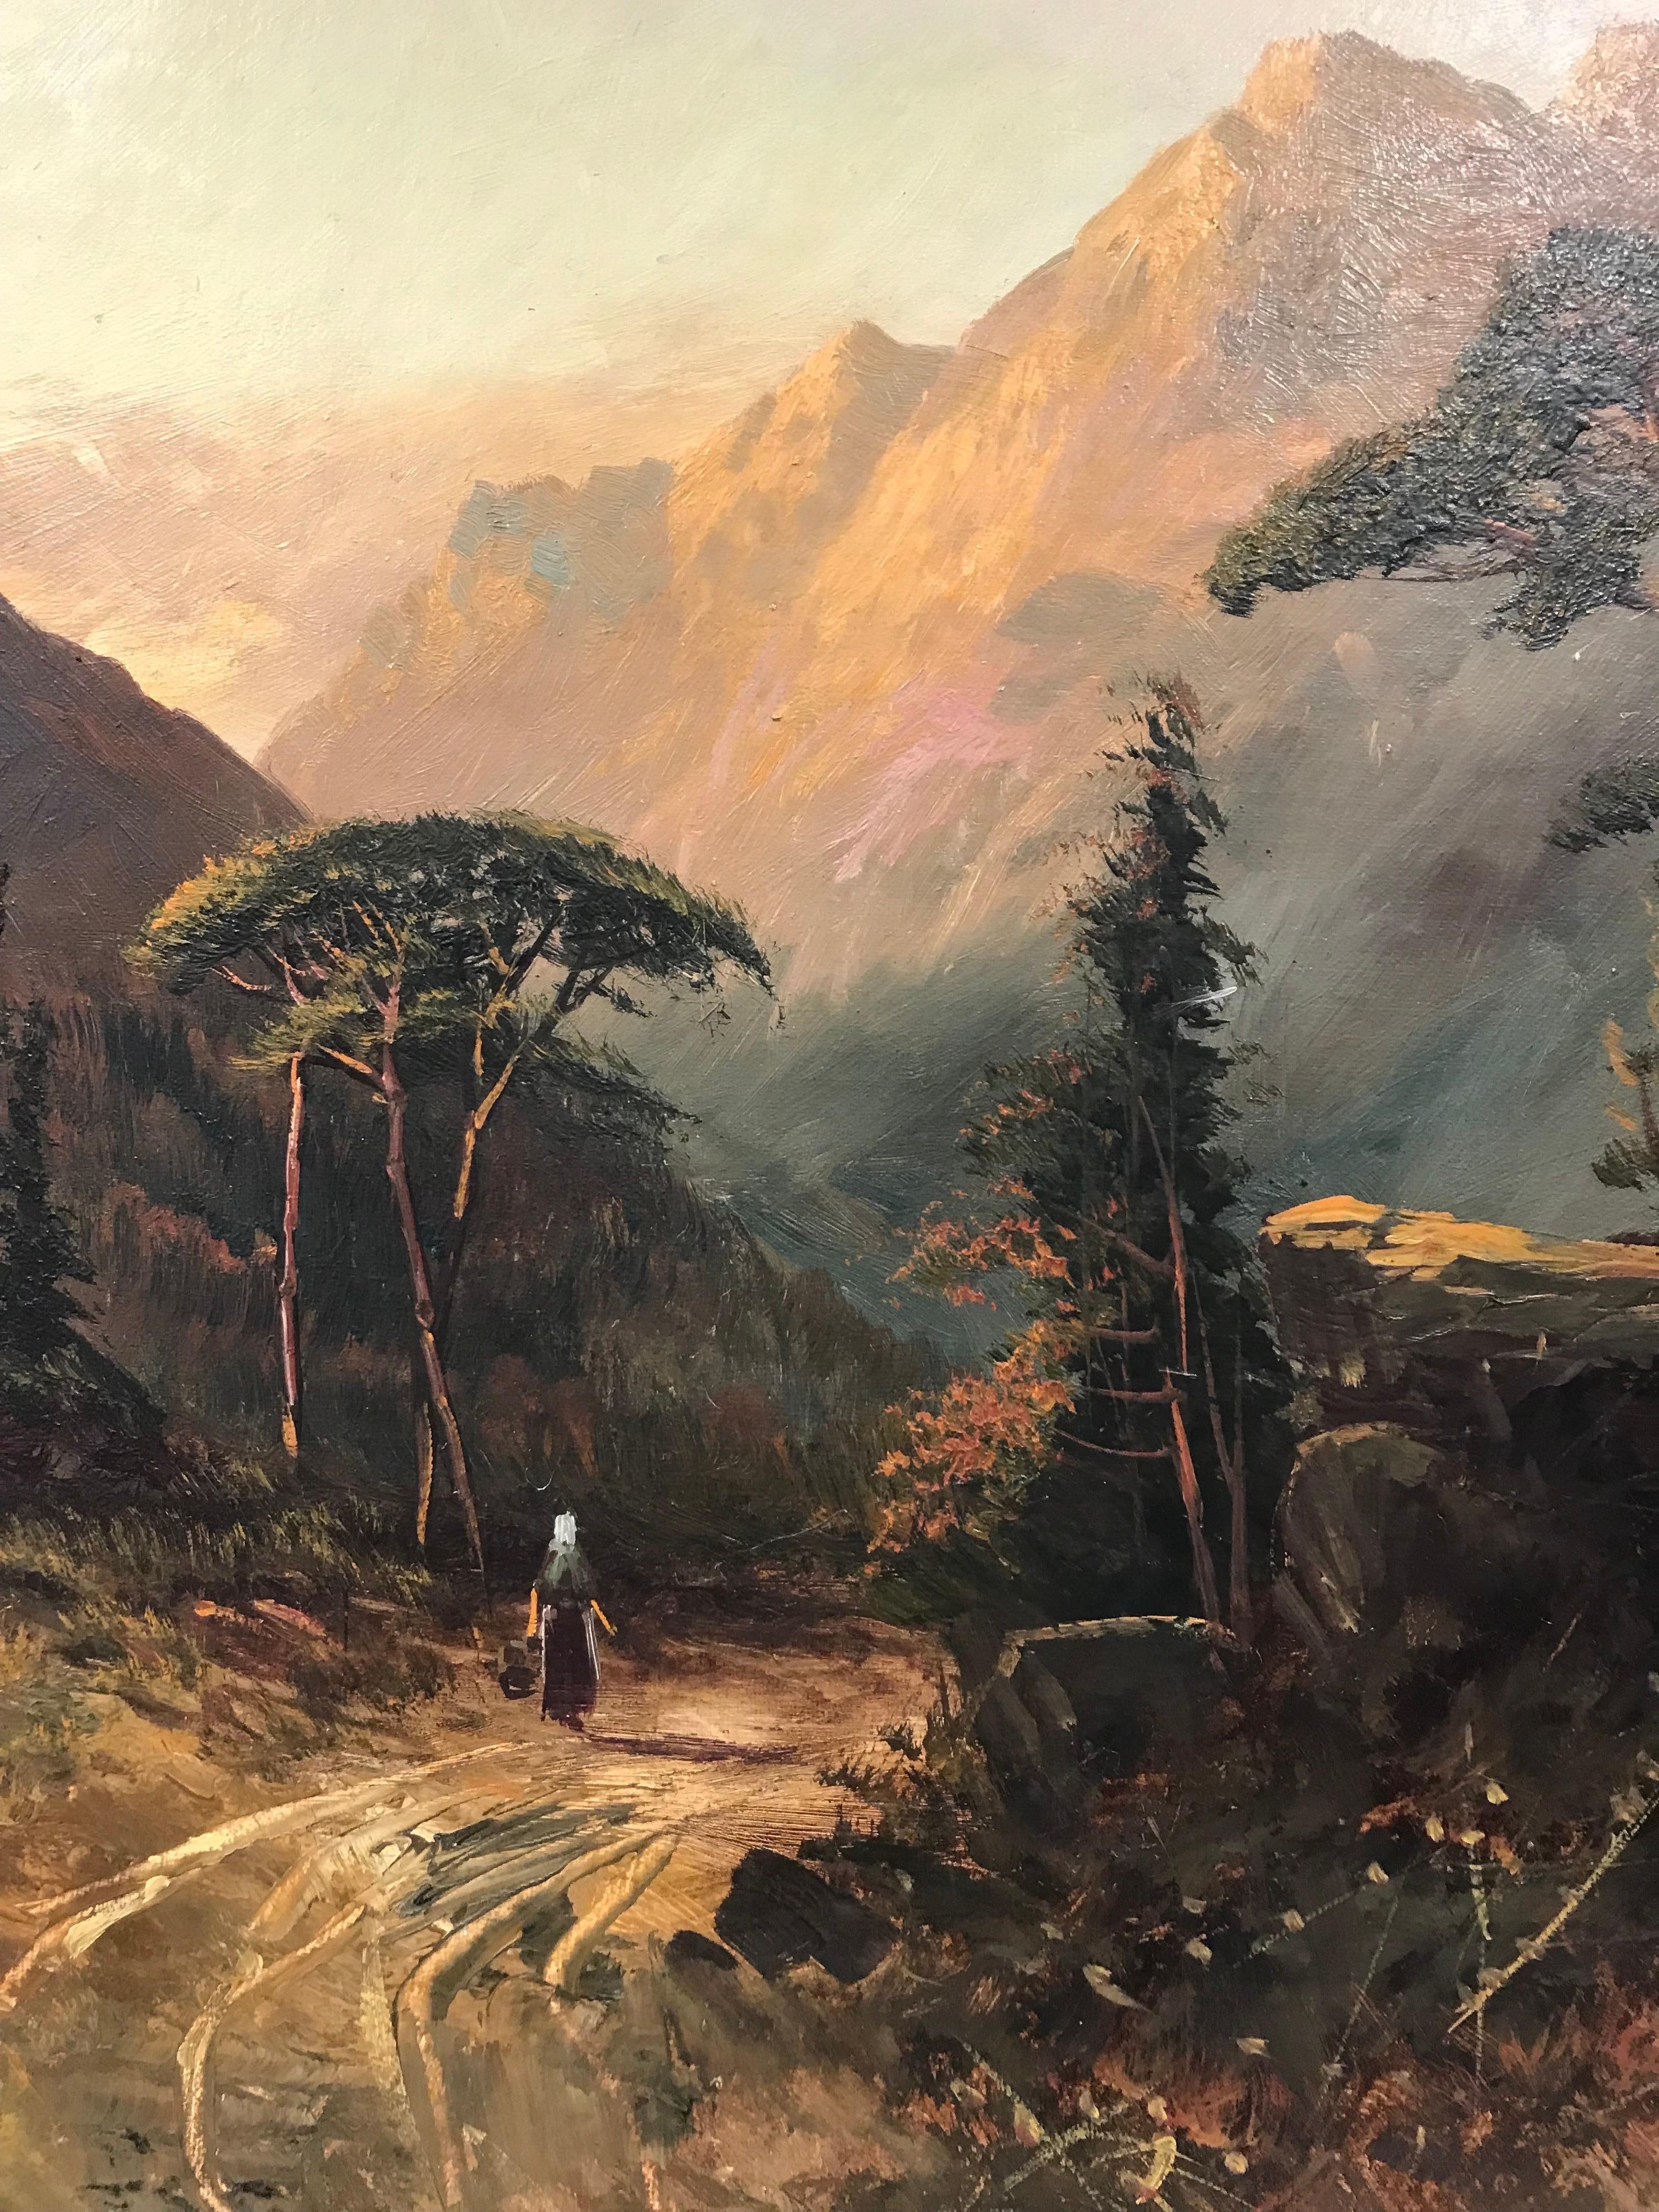 Artist/ School: F. E. Jamieson (British 1895-1950)

Title: Figure walking in the Scottish Highlands, sunset river glen. 

Medium: oil painting on canvas laid over board, framed

framed: 23 x 32 inches
painting: 18 x 27 inches

Provenance: private